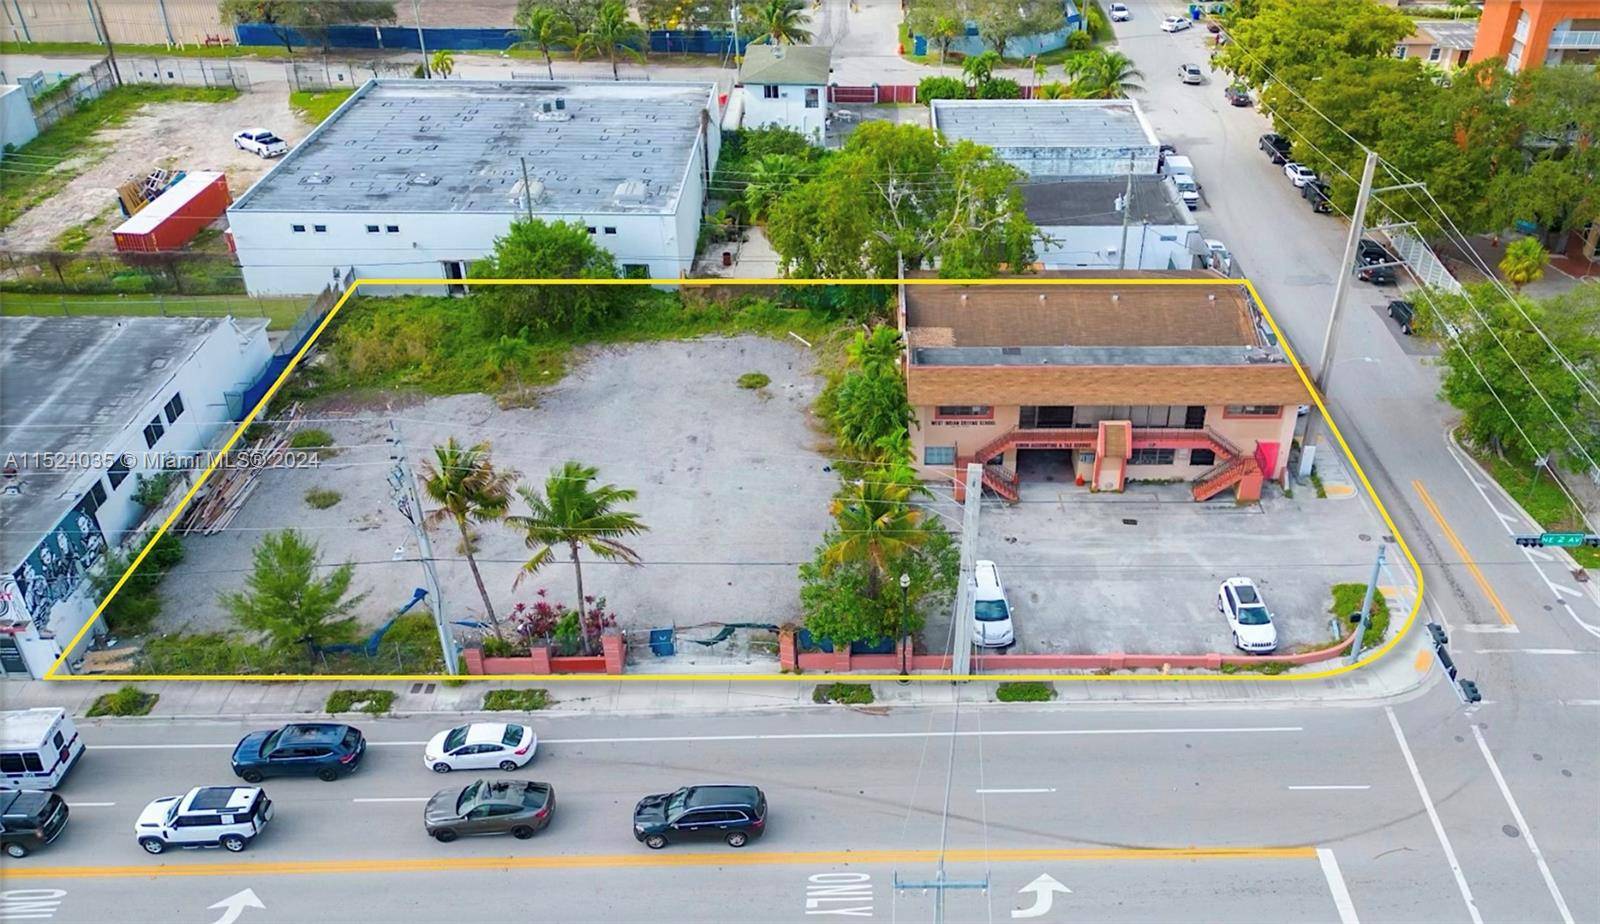 Opportunity to purchase a prime hard corner development site in Little River, Miami s hottest emerging market.